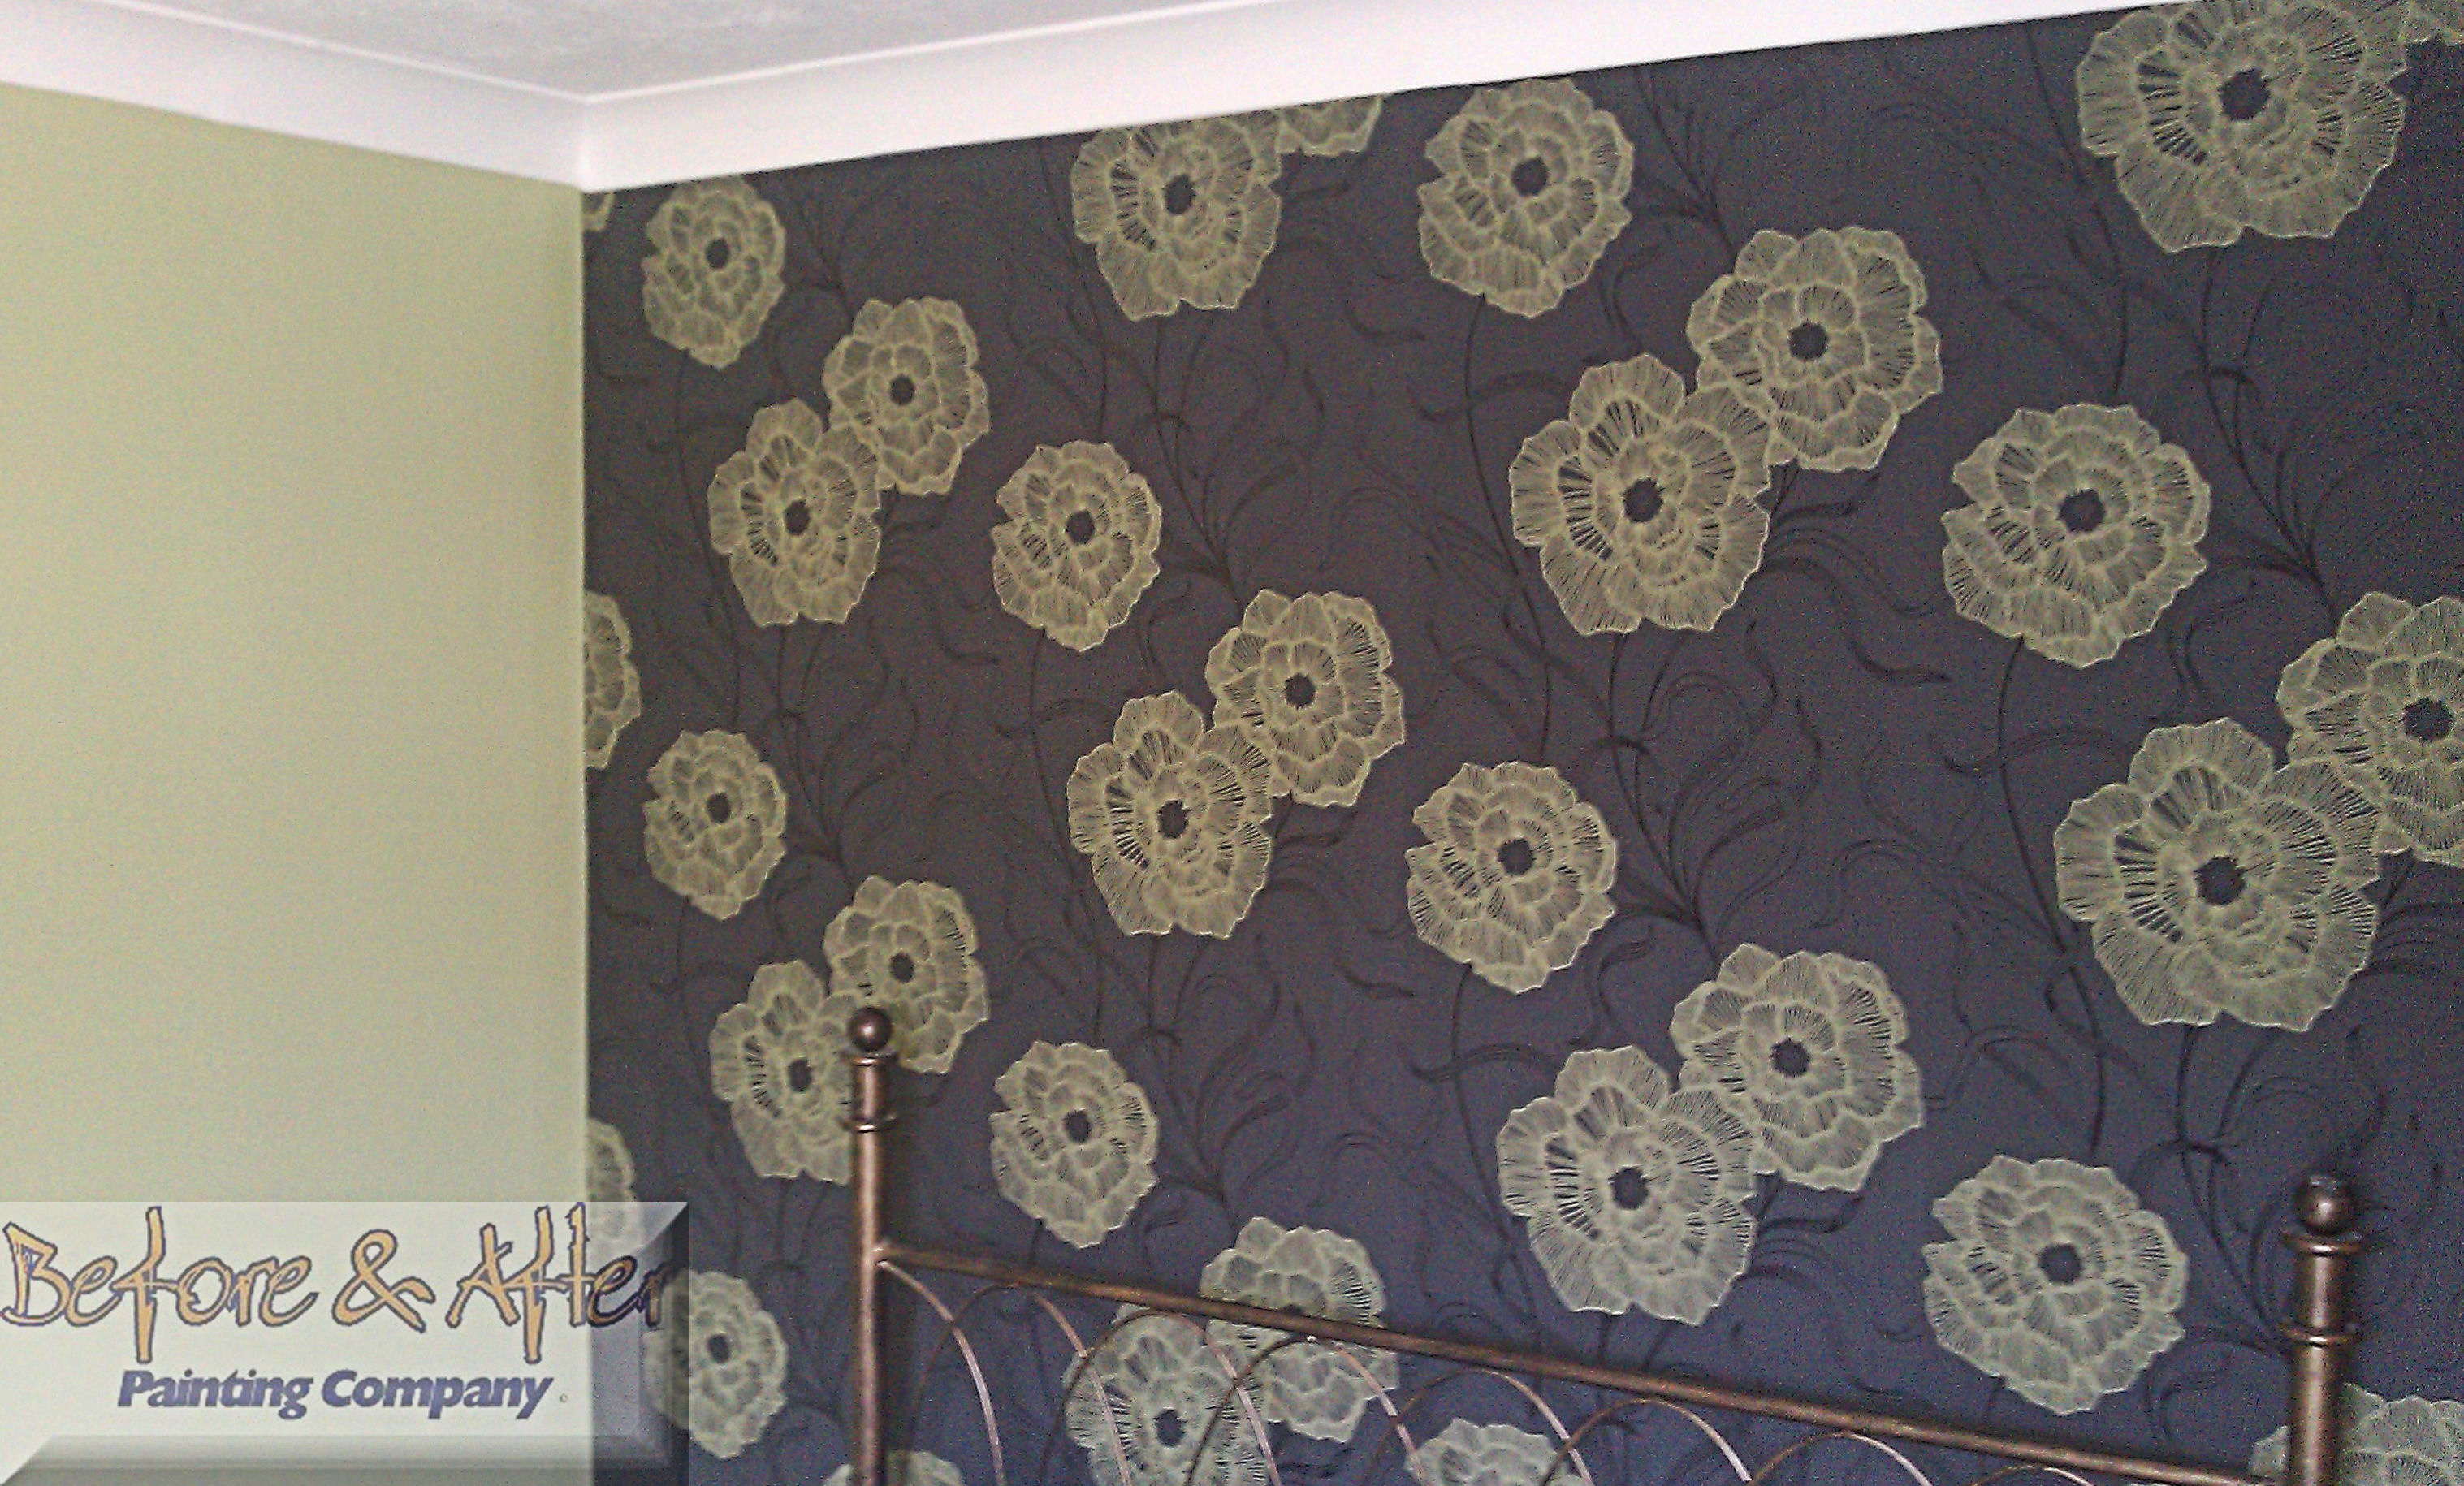 Feature papered wall using Eurostudio Elements